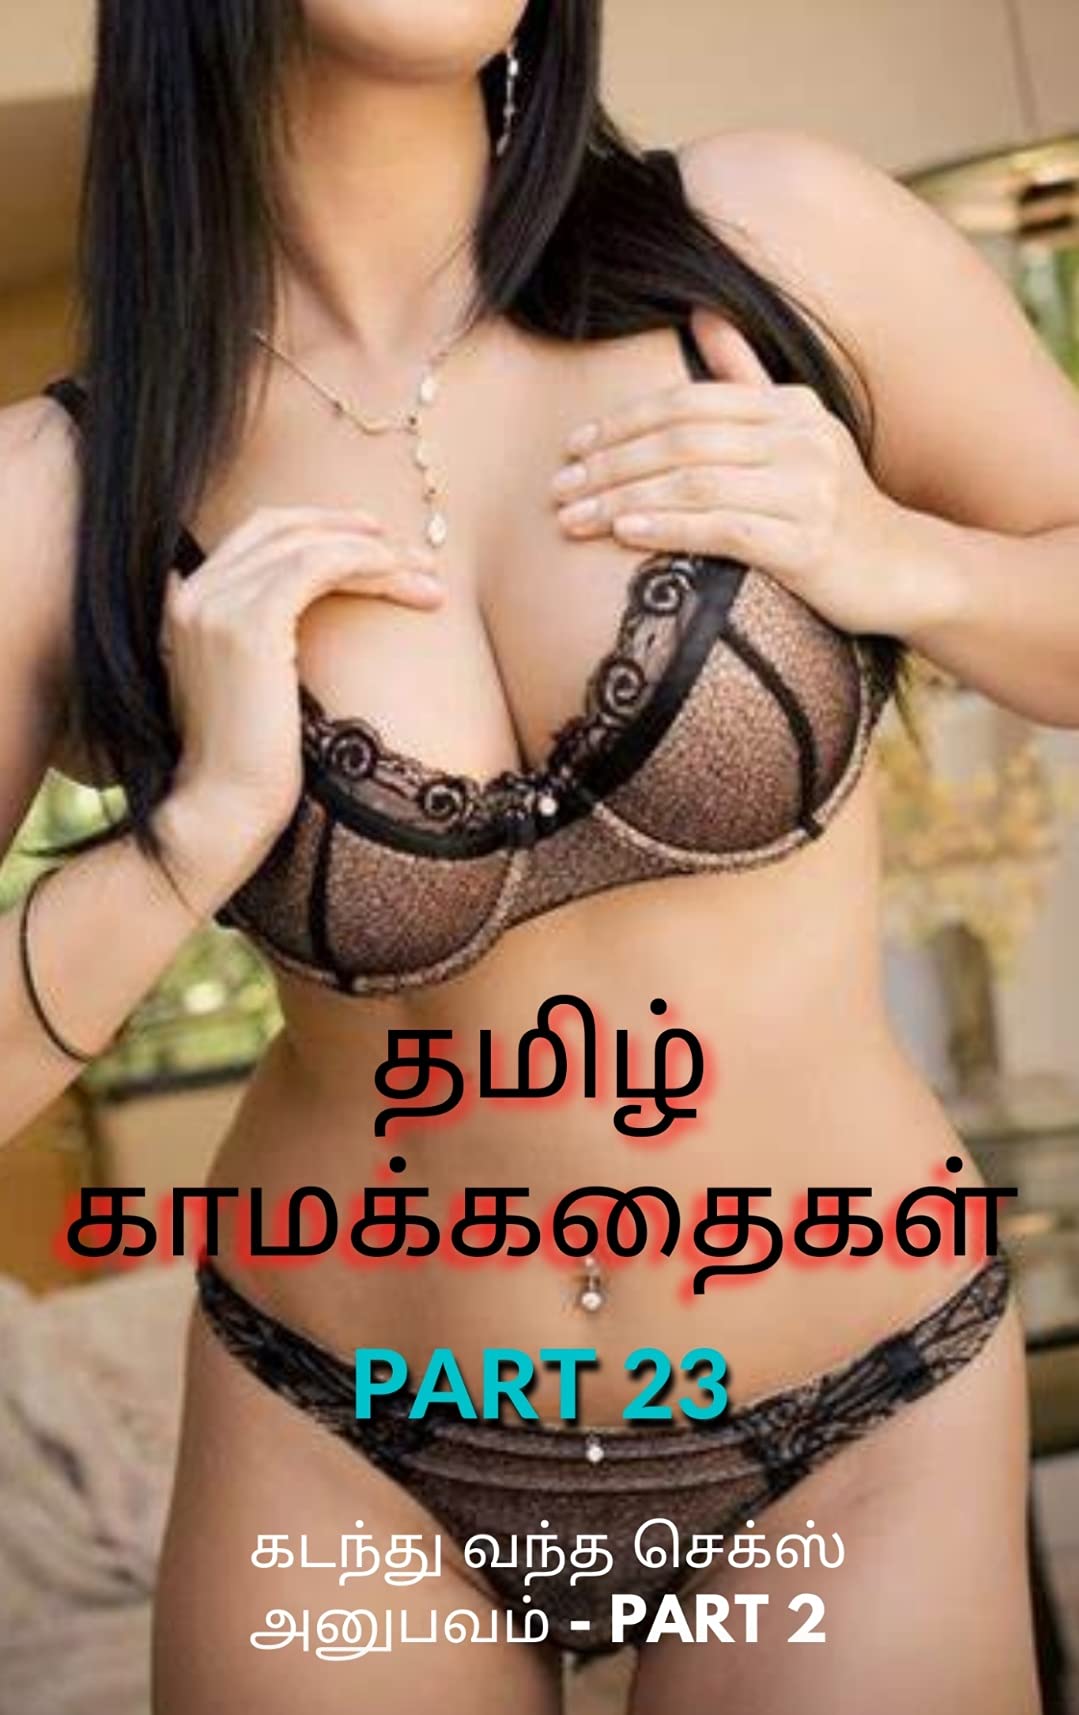 alexander metzler recommends tamilsex story in pdf pic